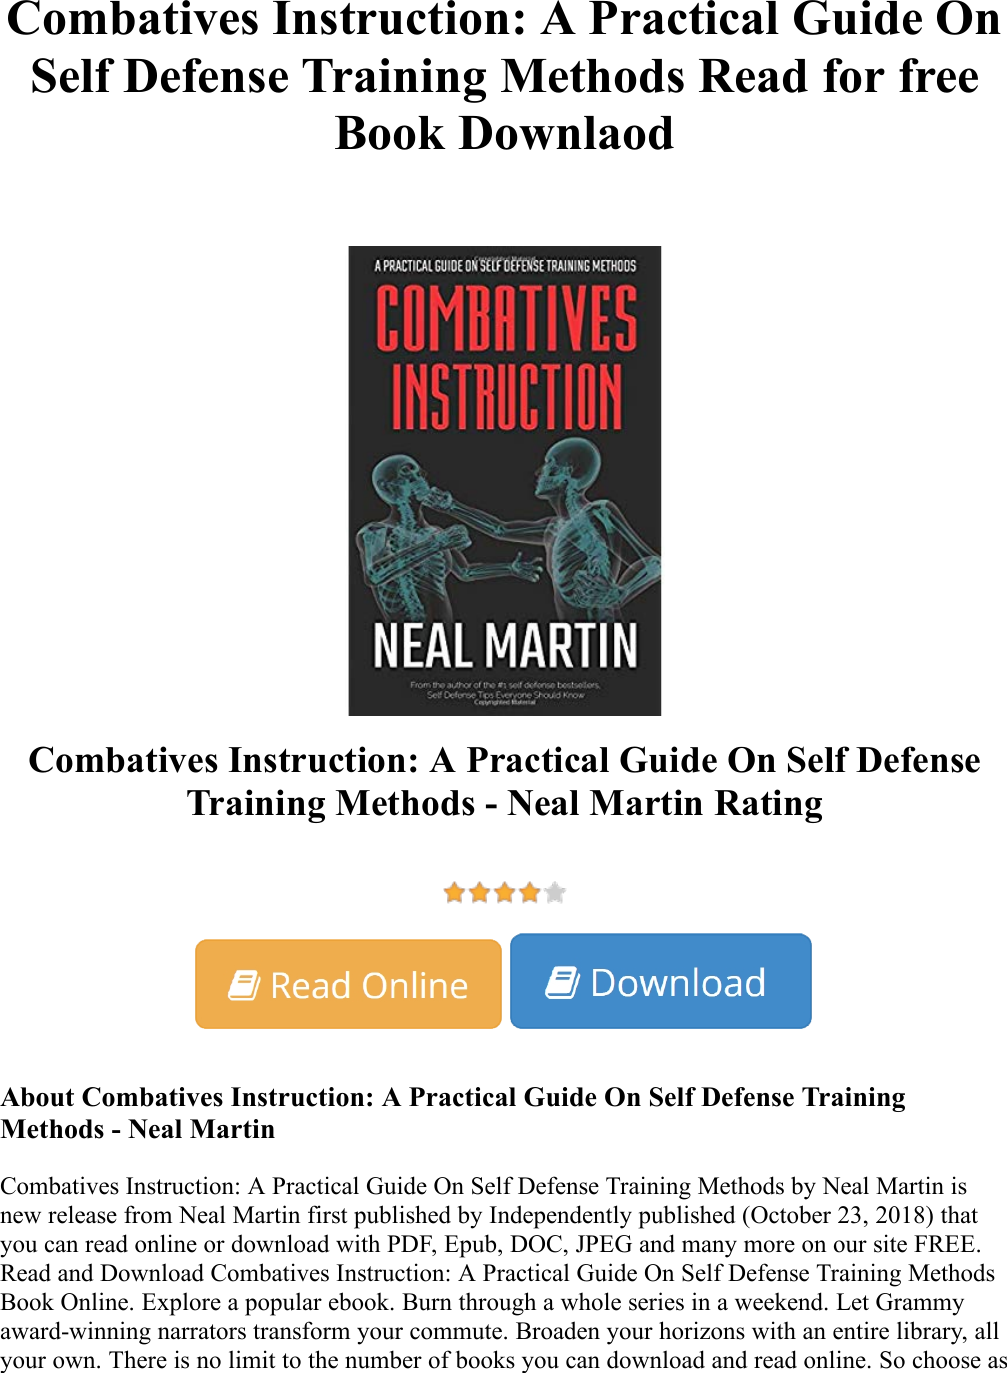 Page 1 of 2 - Combatives Instruction: A Practical Guide On Self Defense Training Methods - Neal Martin Read For Free Book Downlaod Combatives-Instruction-A-Practical-Guide-On-Self-Defense-Training-Methods